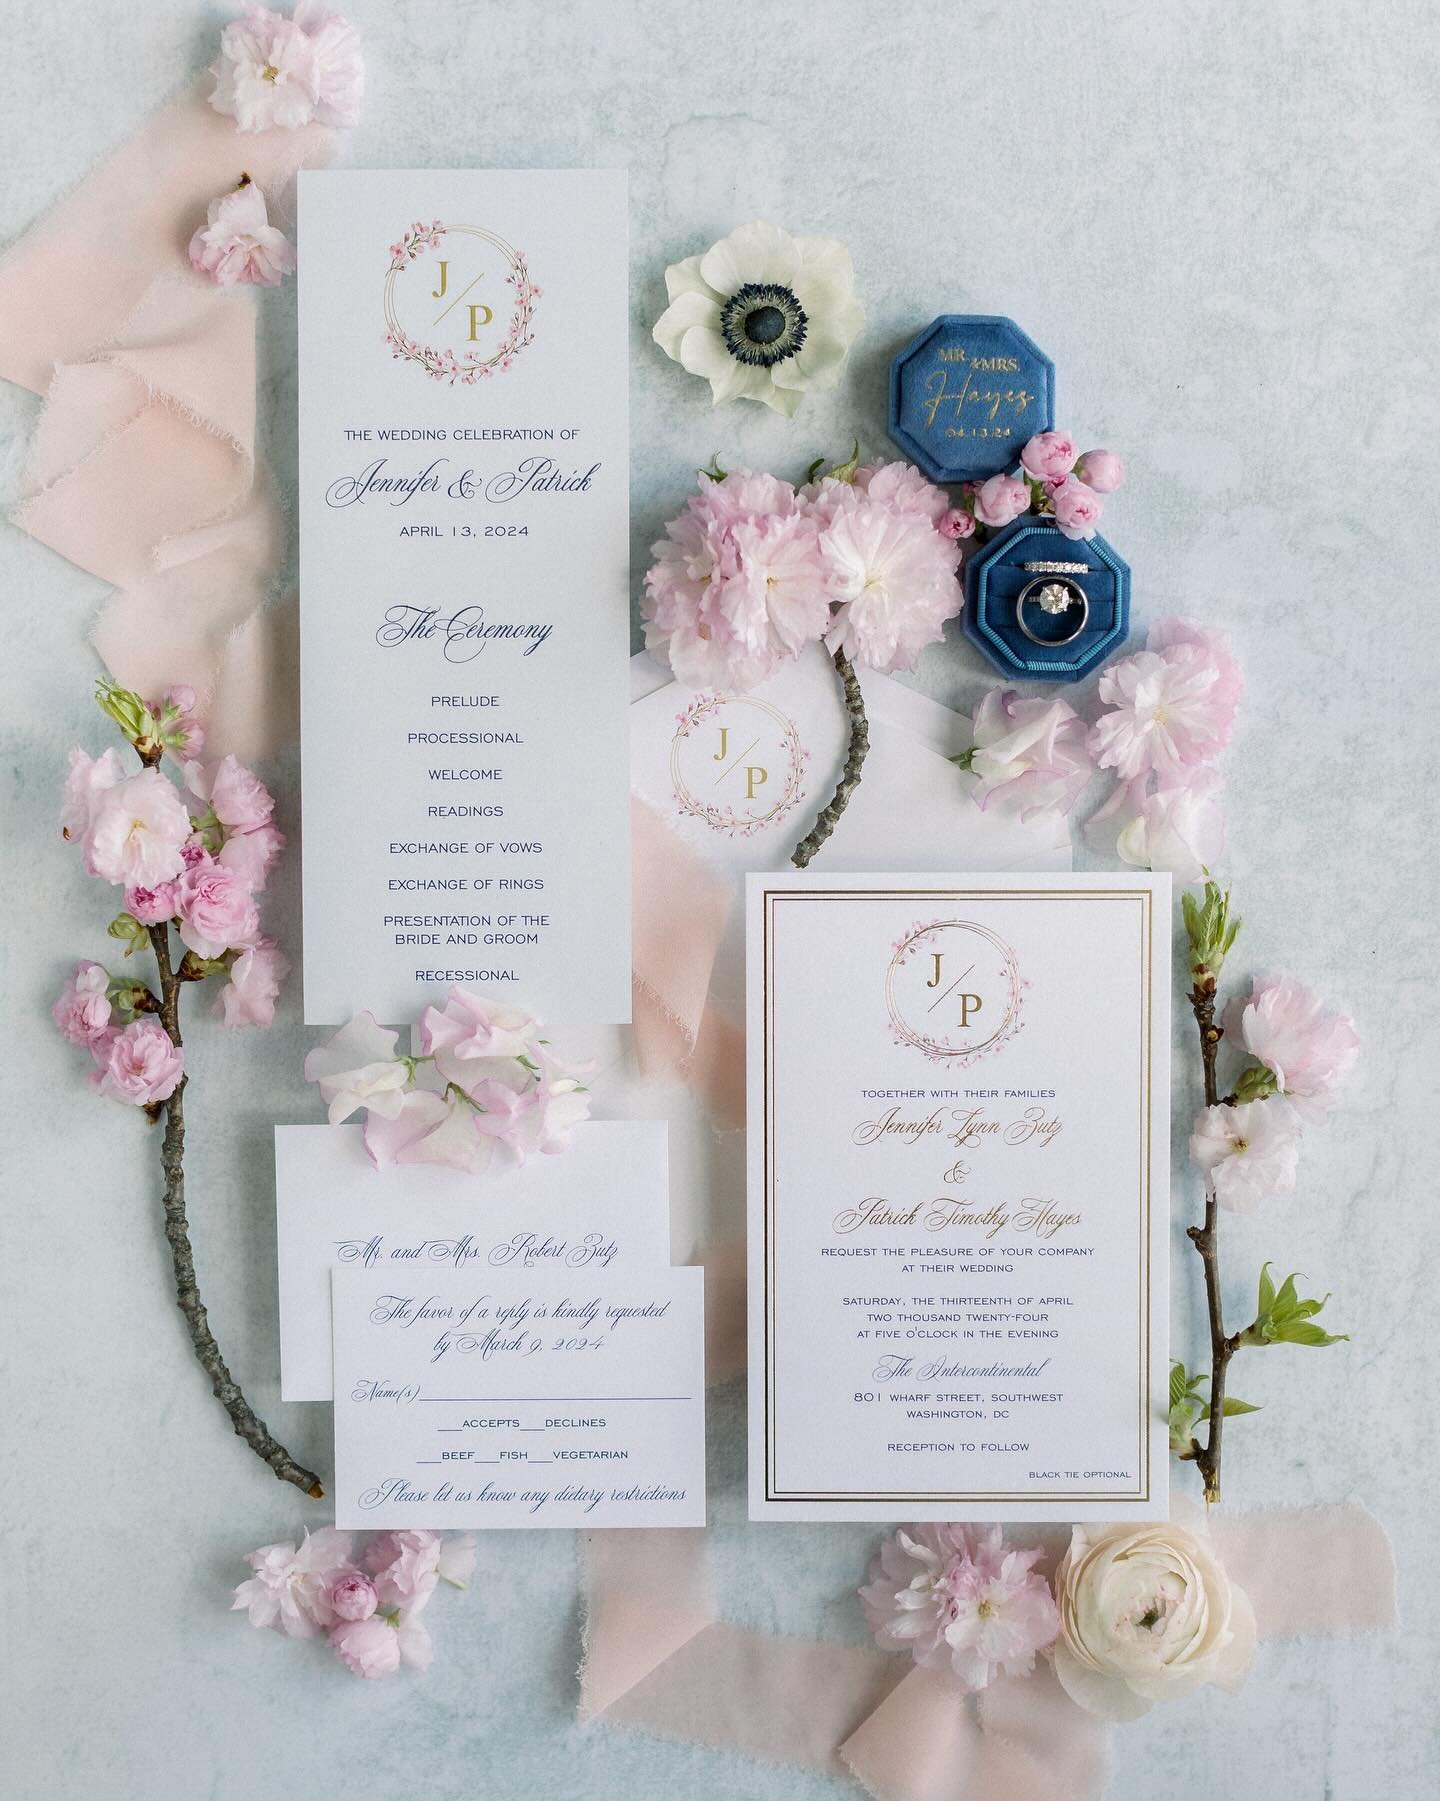 Peak into the realm of wedding details where each flower, invitation, bottle of perfume and ring narrates a love story. These beautifully curated flat lays, by talented photographers transcend the photograph and offer a glimpse into the story behind 